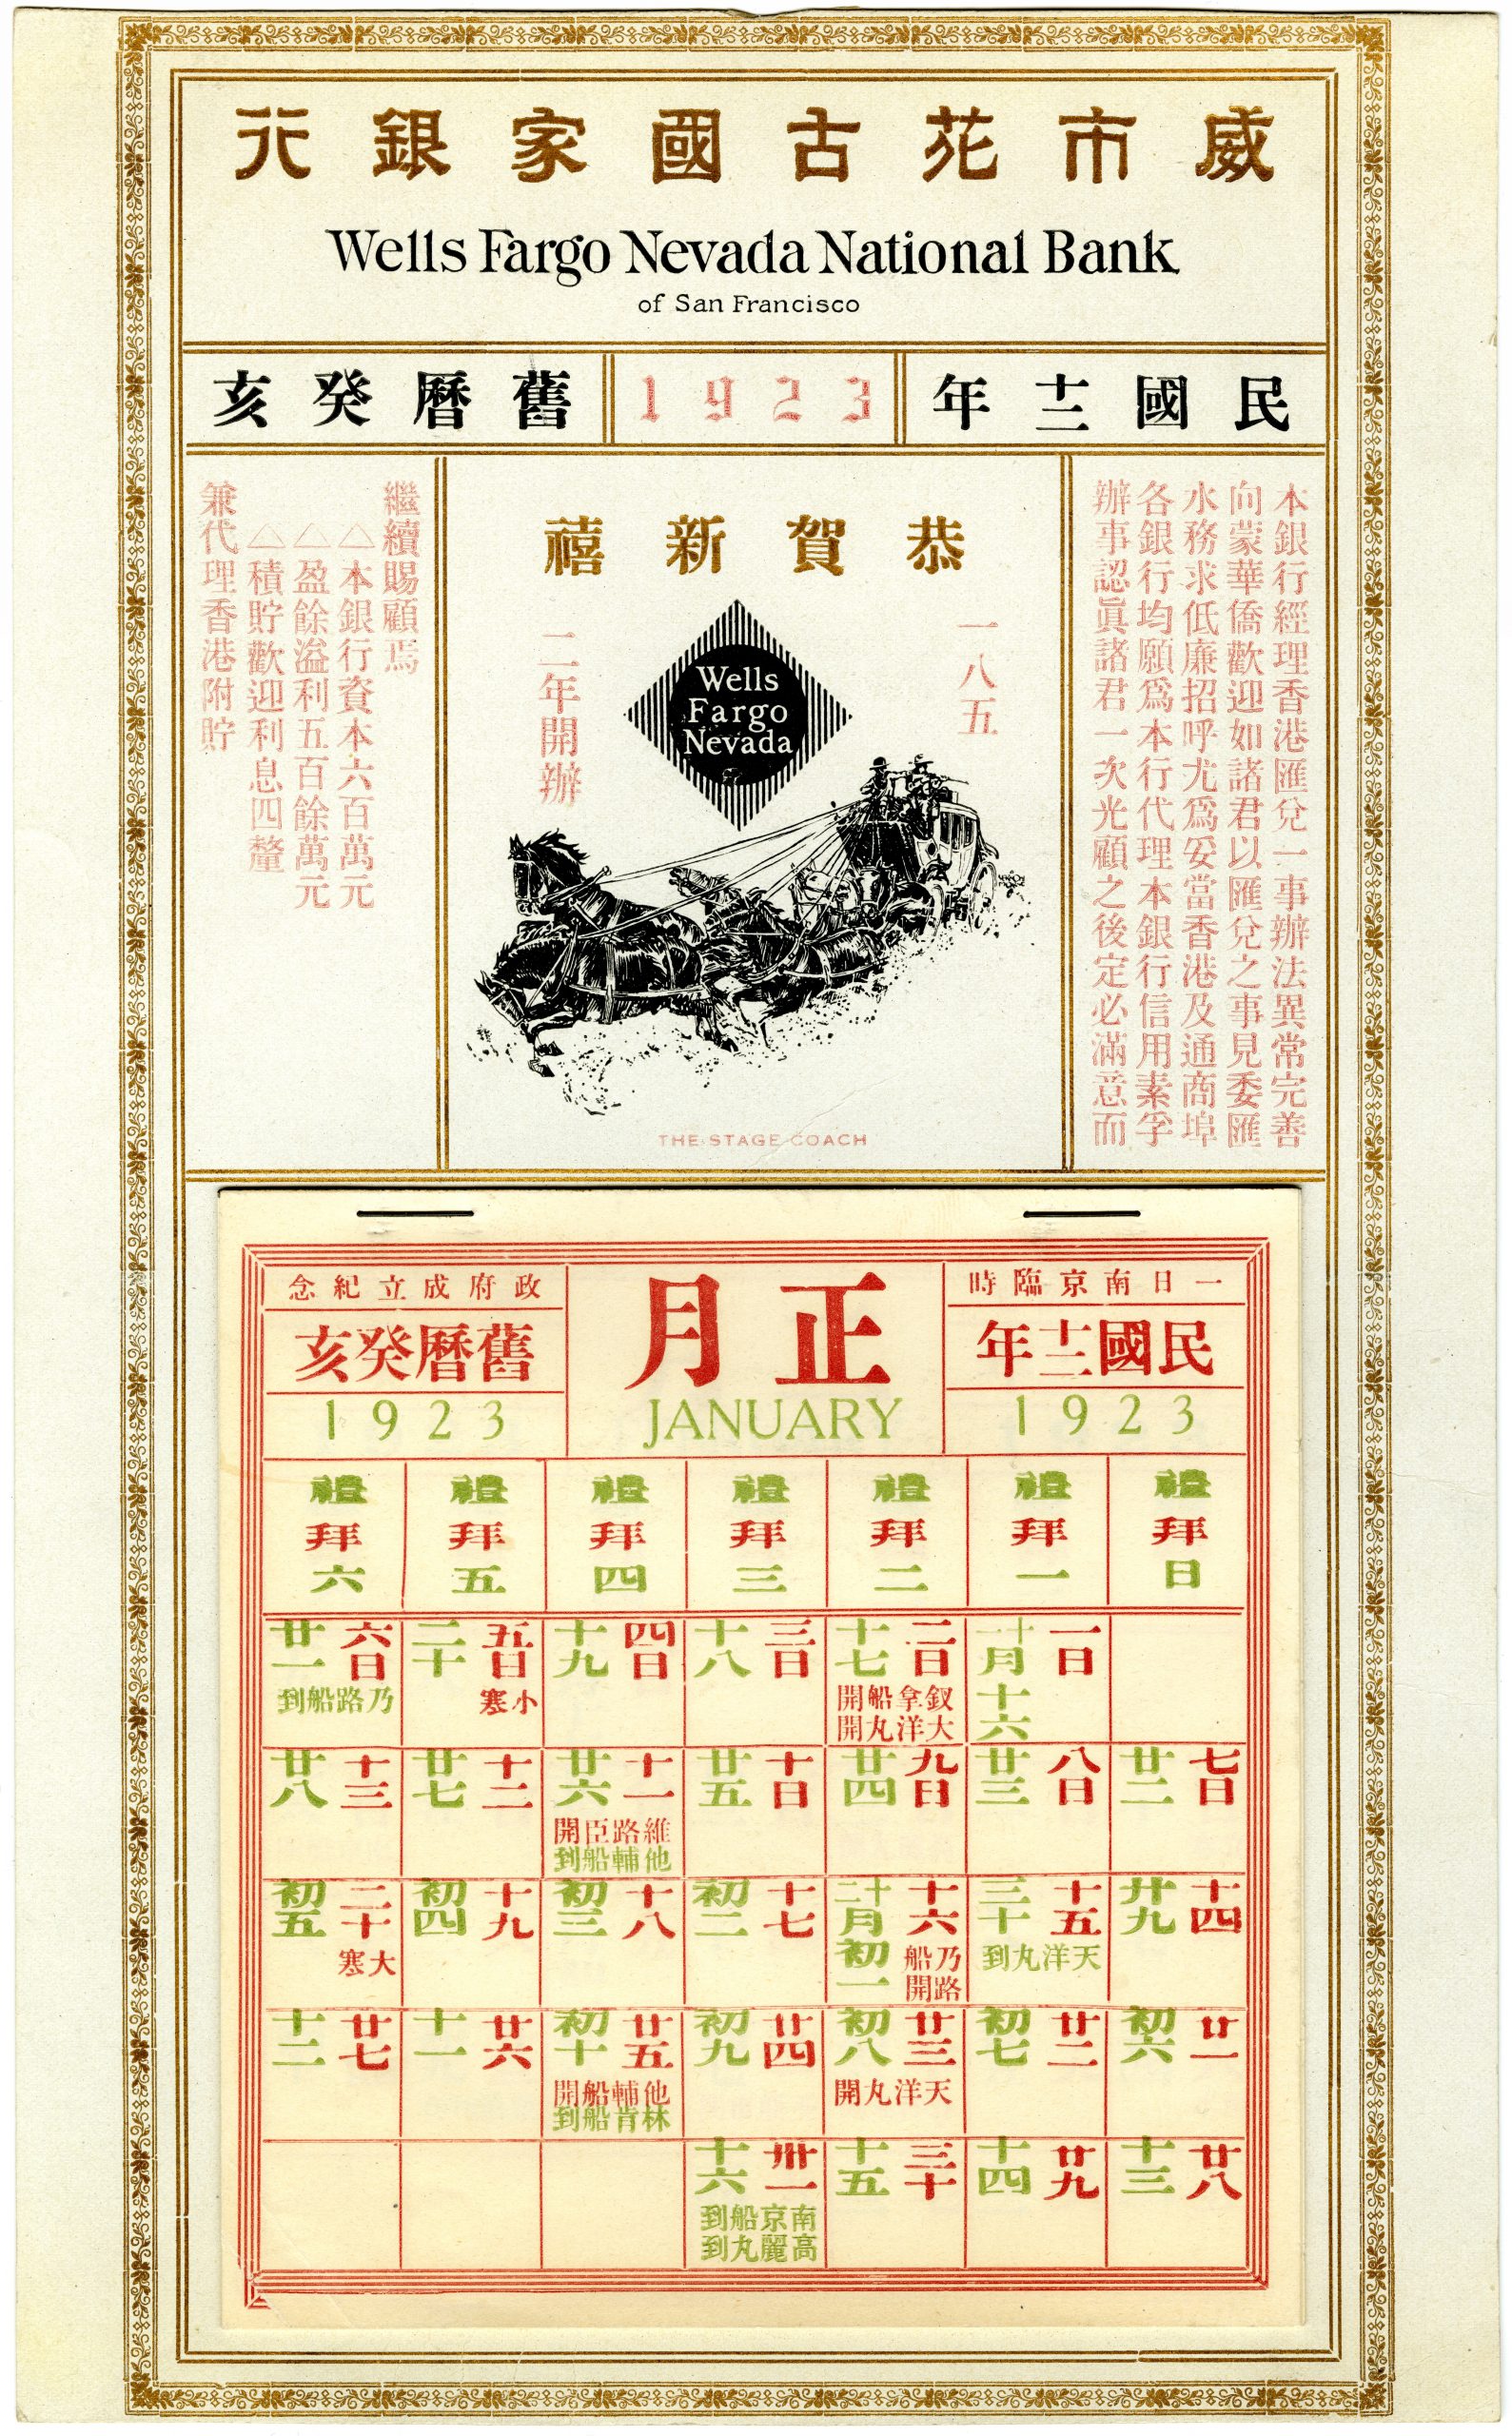 On this 1923 calendar featuring a Wells Fargo stagecoach illustration, the characters in green mark the days according to the lunar calendar. The days of the Western calendar, which appear in red, count time based on the earth’s revolution around the sun.